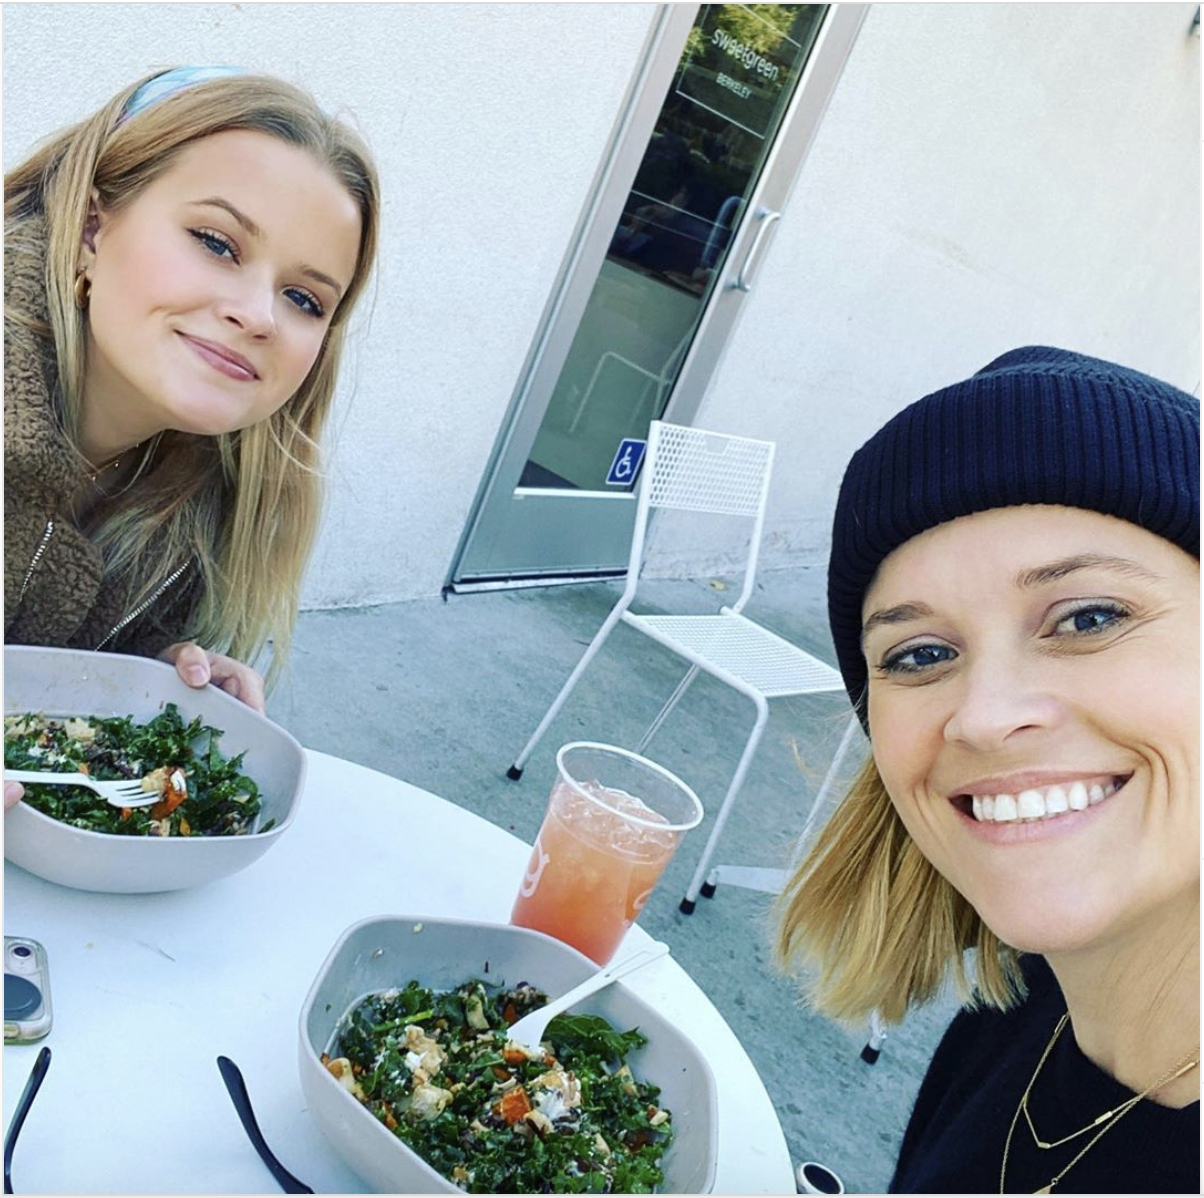 Reese Witherspoon's Daughter Ava Literally Looks Like Her Twin in This Instagram Pic